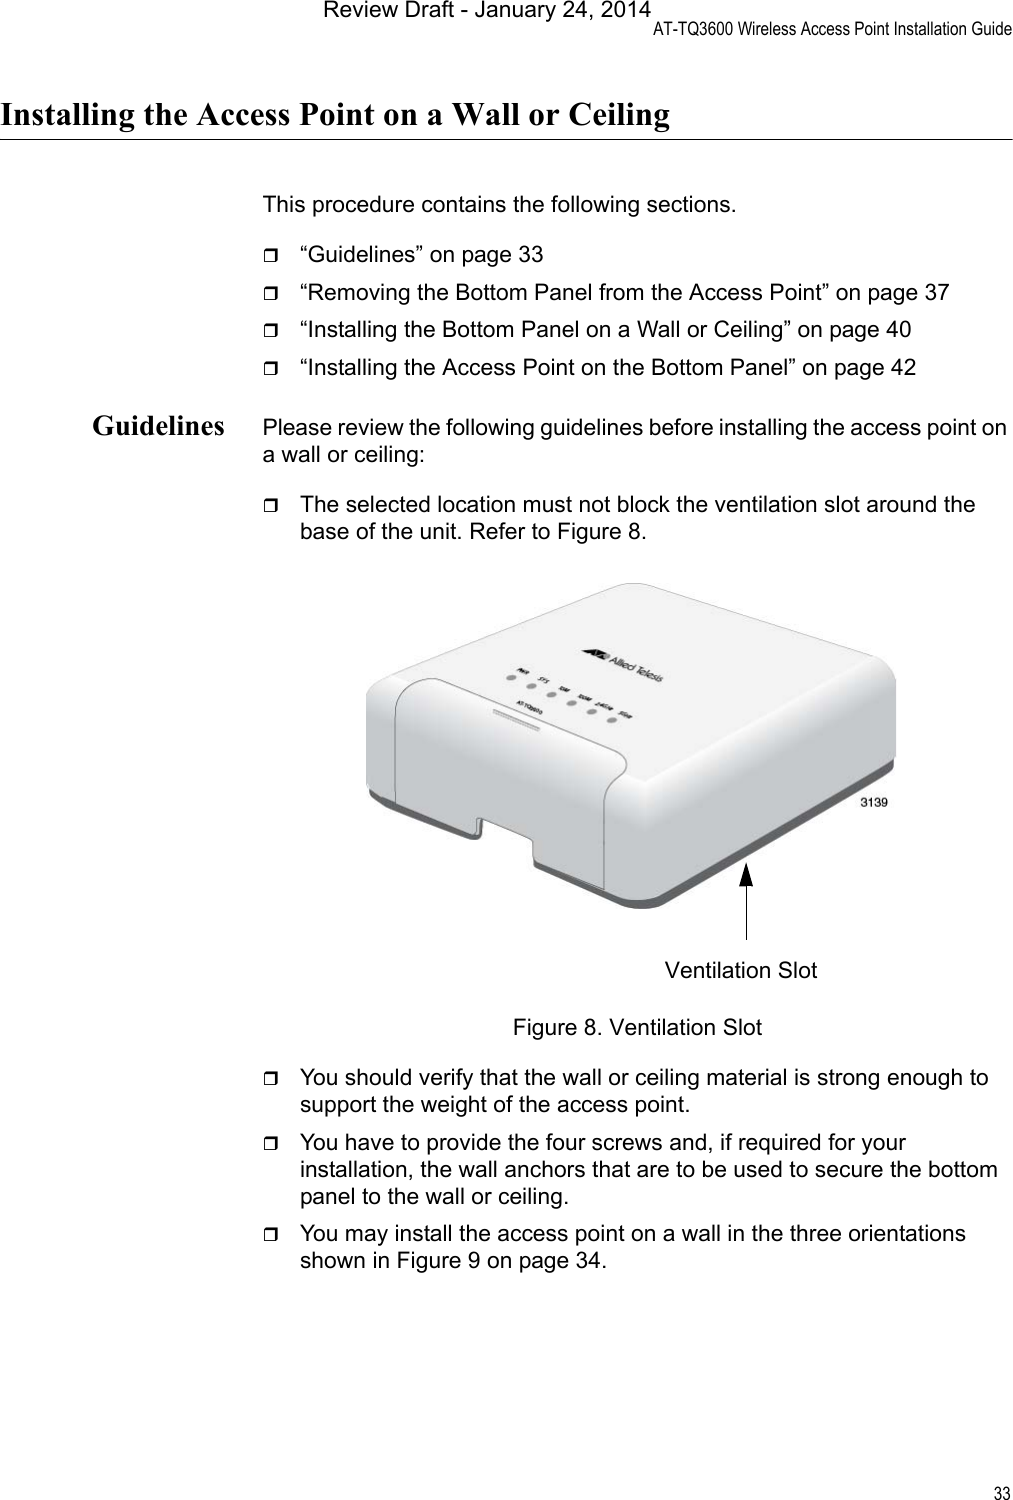 AT-TQ3600 Wireless Access Point Installation Guide33Installing the Access Point on a Wall or CeilingThis procedure contains the following sections.“Guidelines” on page 33“Removing the Bottom Panel from the Access Point” on page 37“Installing the Bottom Panel on a Wall or Ceiling” on page 40“Installing the Access Point on the Bottom Panel” on page 42Guidelines Please review the following guidelines before installing the access point on a wall or ceiling:The selected location must not block the ventilation slot around the base of the unit. Refer to Figure 8.Figure 8. Ventilation SlotYou should verify that the wall or ceiling material is strong enough to support the weight of the access point.You have to provide the four screws and, if required for your installation, the wall anchors that are to be used to secure the bottom panel to the wall or ceiling.You may install the access point on a wall in the three orientations shown in Figure 9 on page 34.Ventilation SlotReview Draft - January 24, 2014